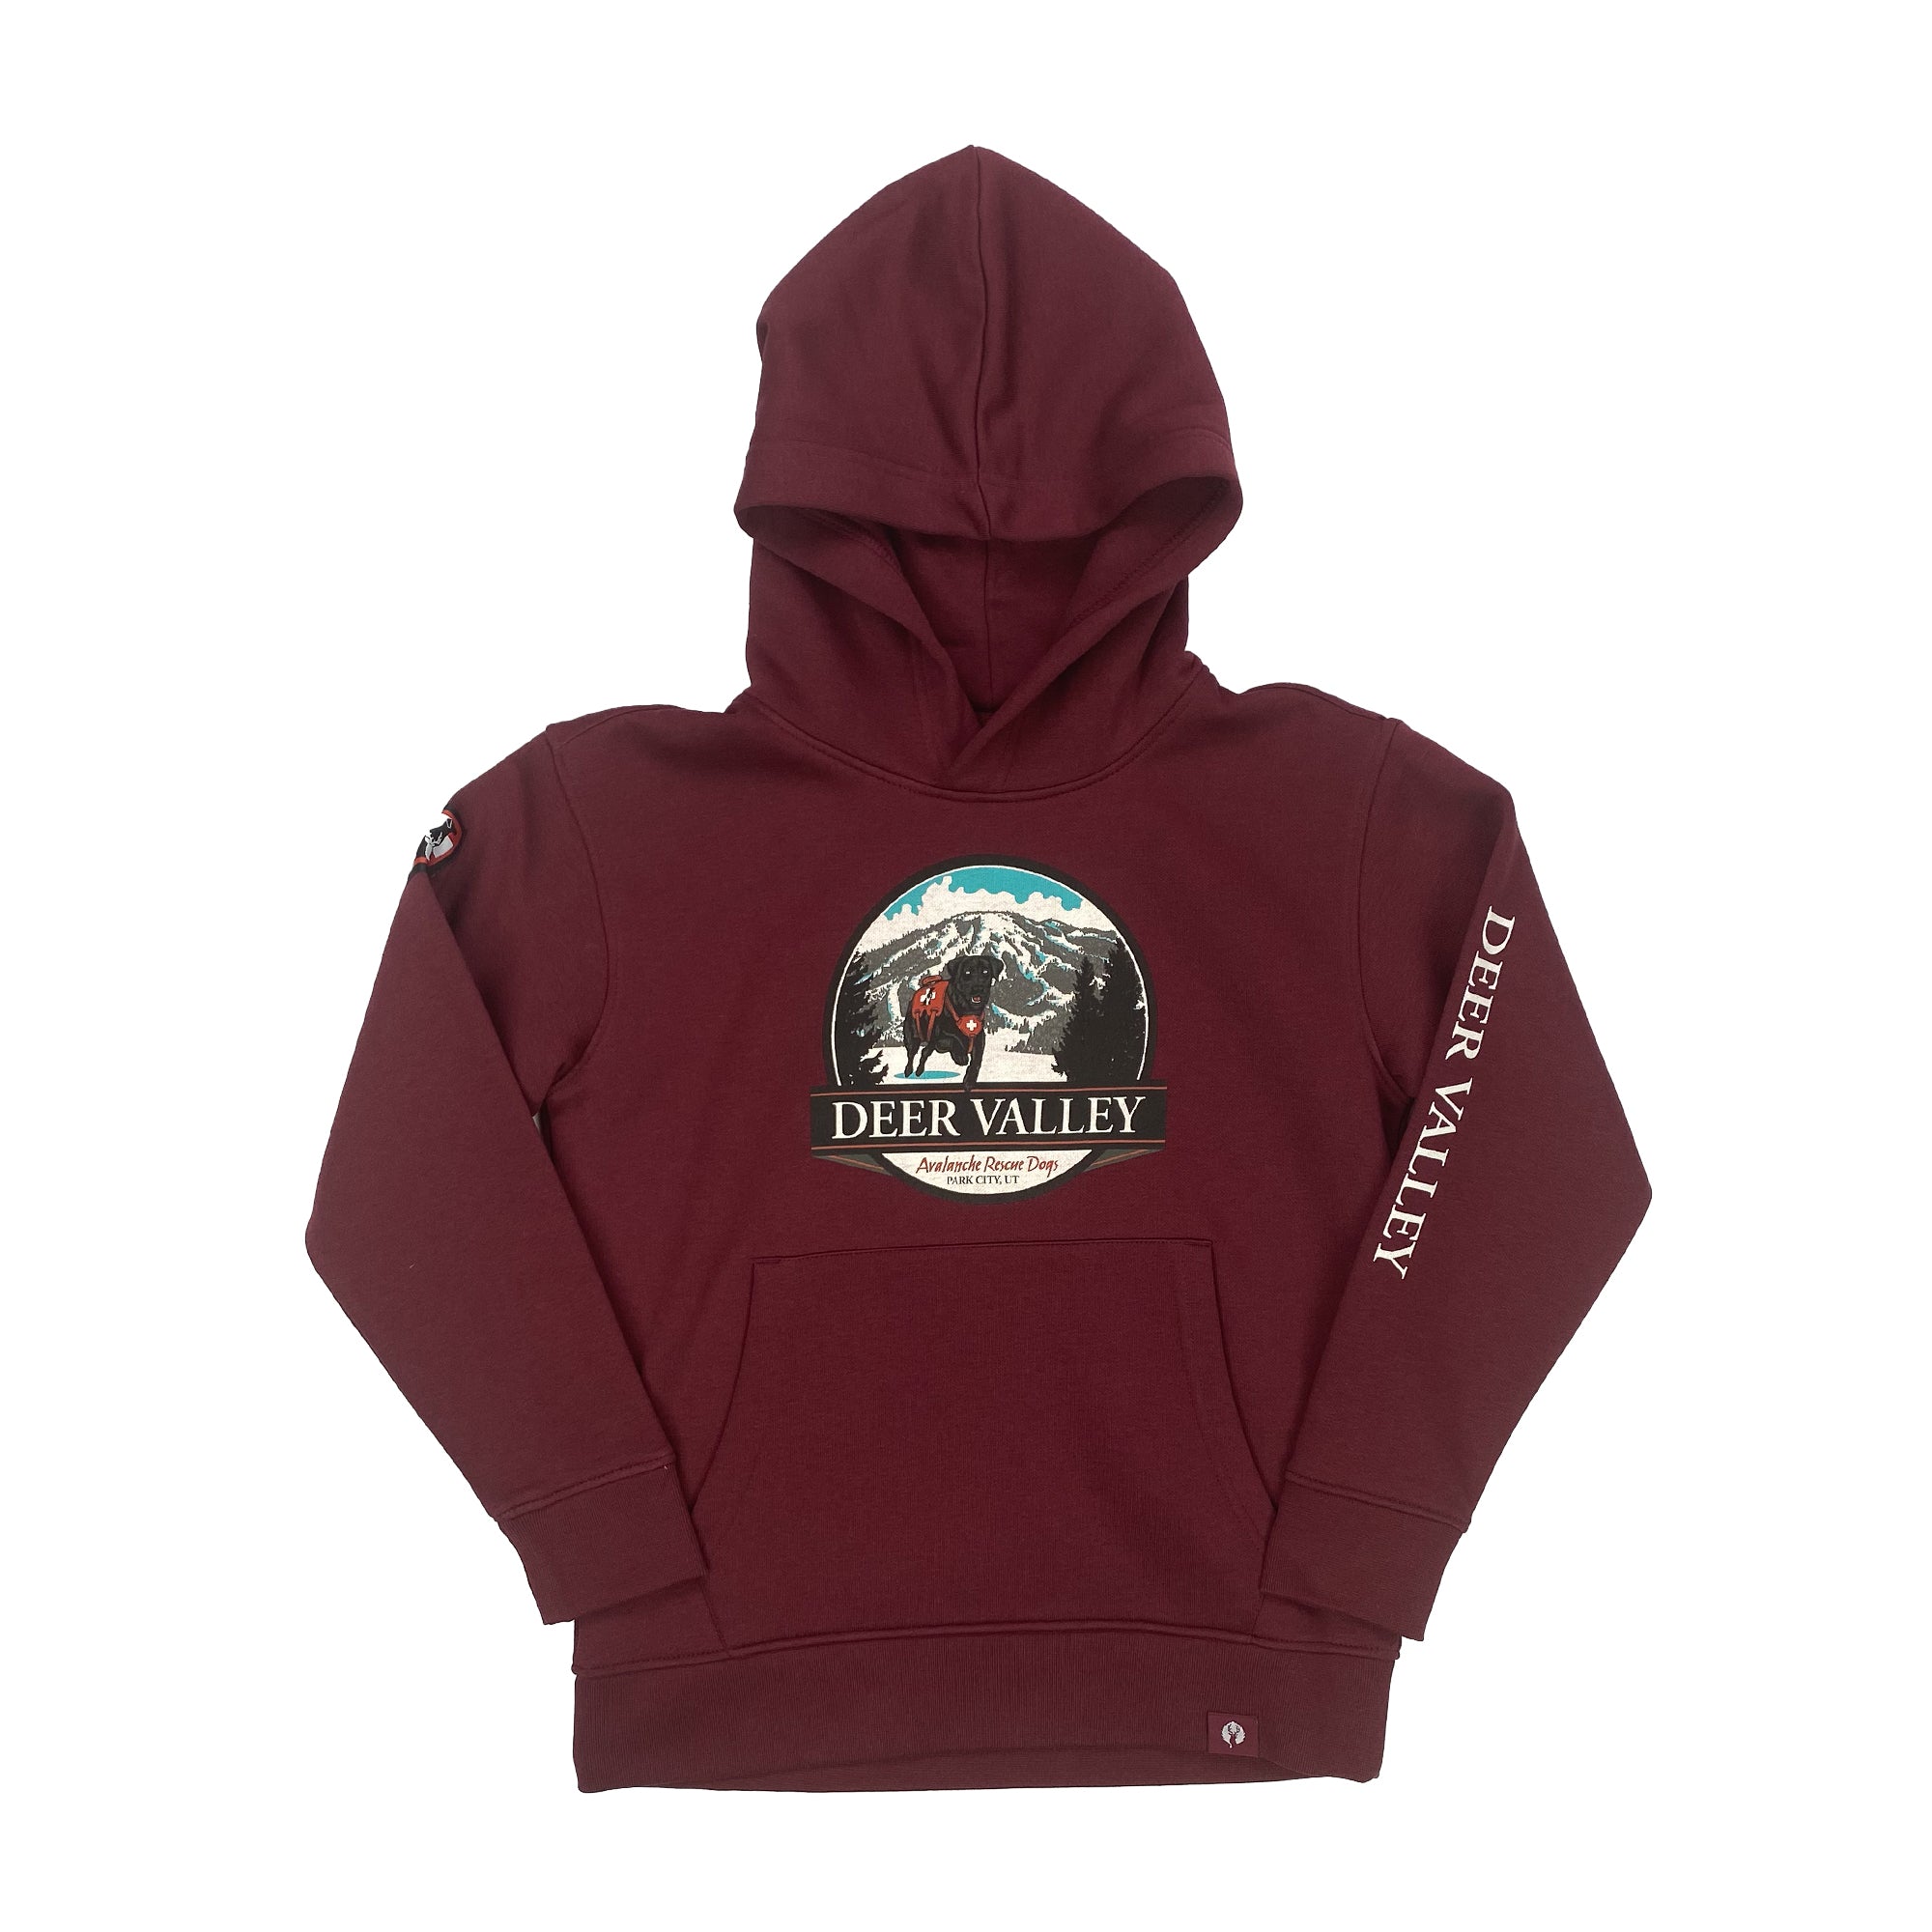 Toddler Avalanche Rescue Dog Hoody